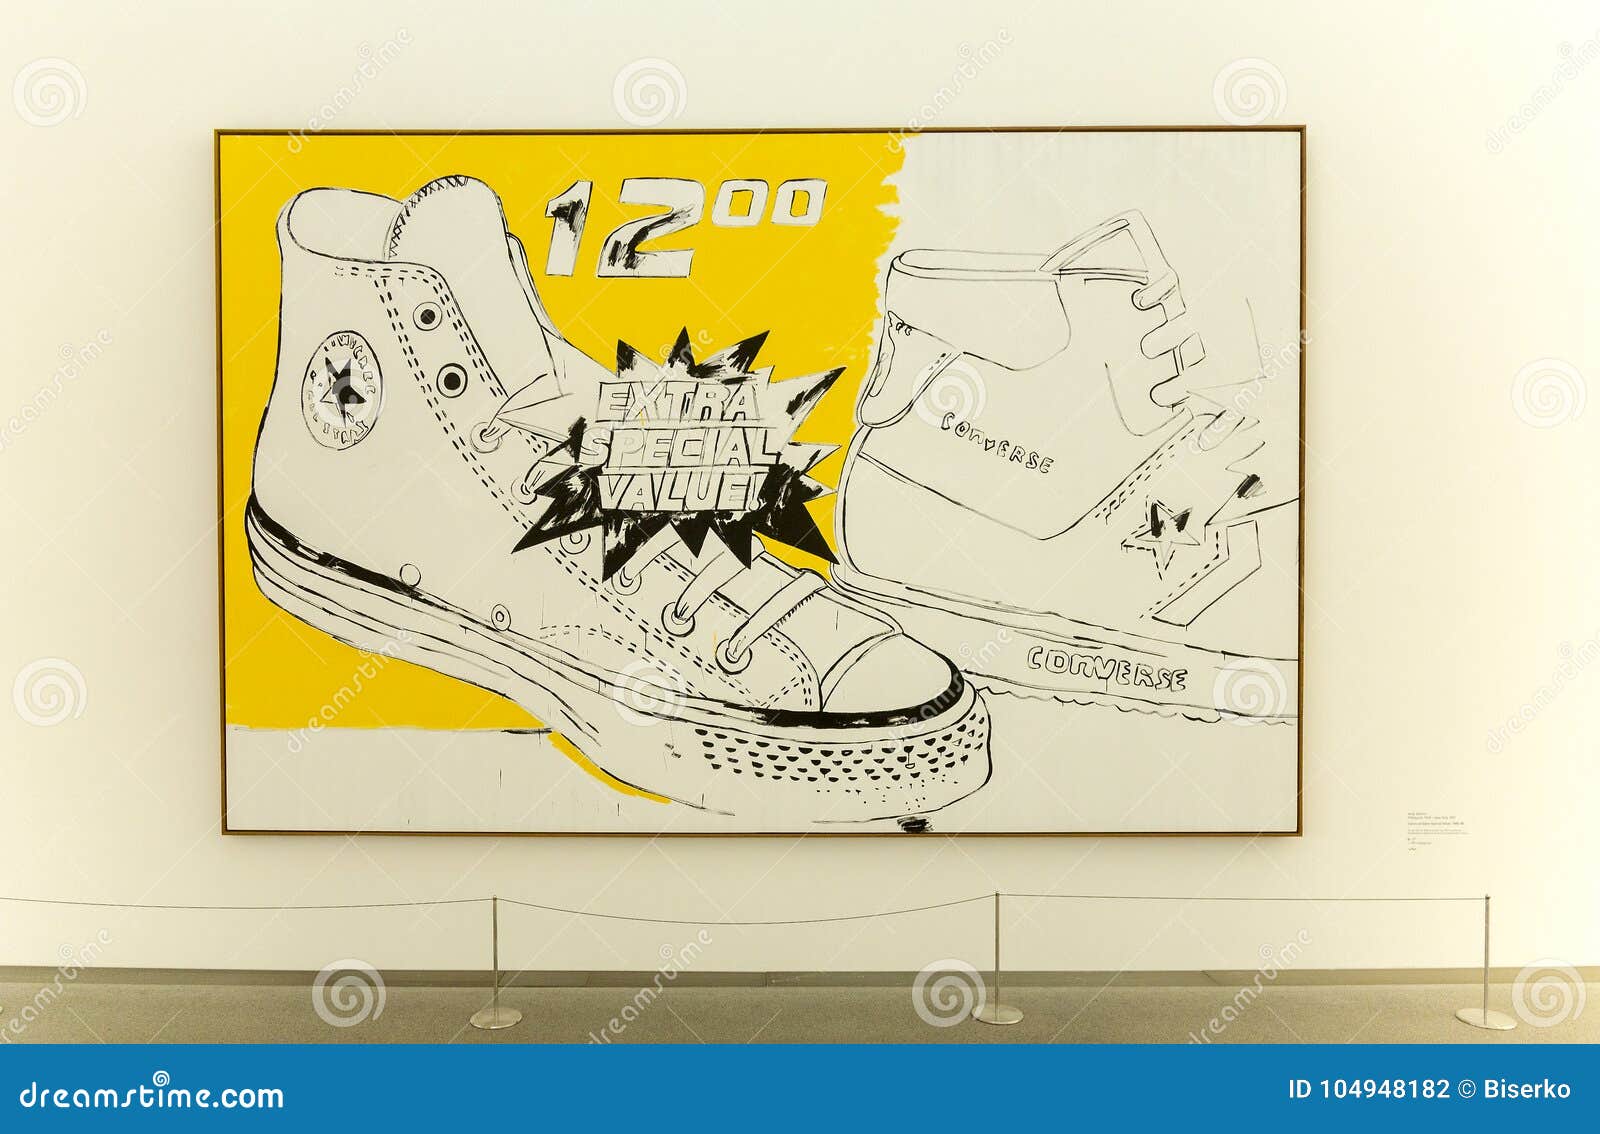 andy warhol converse painting